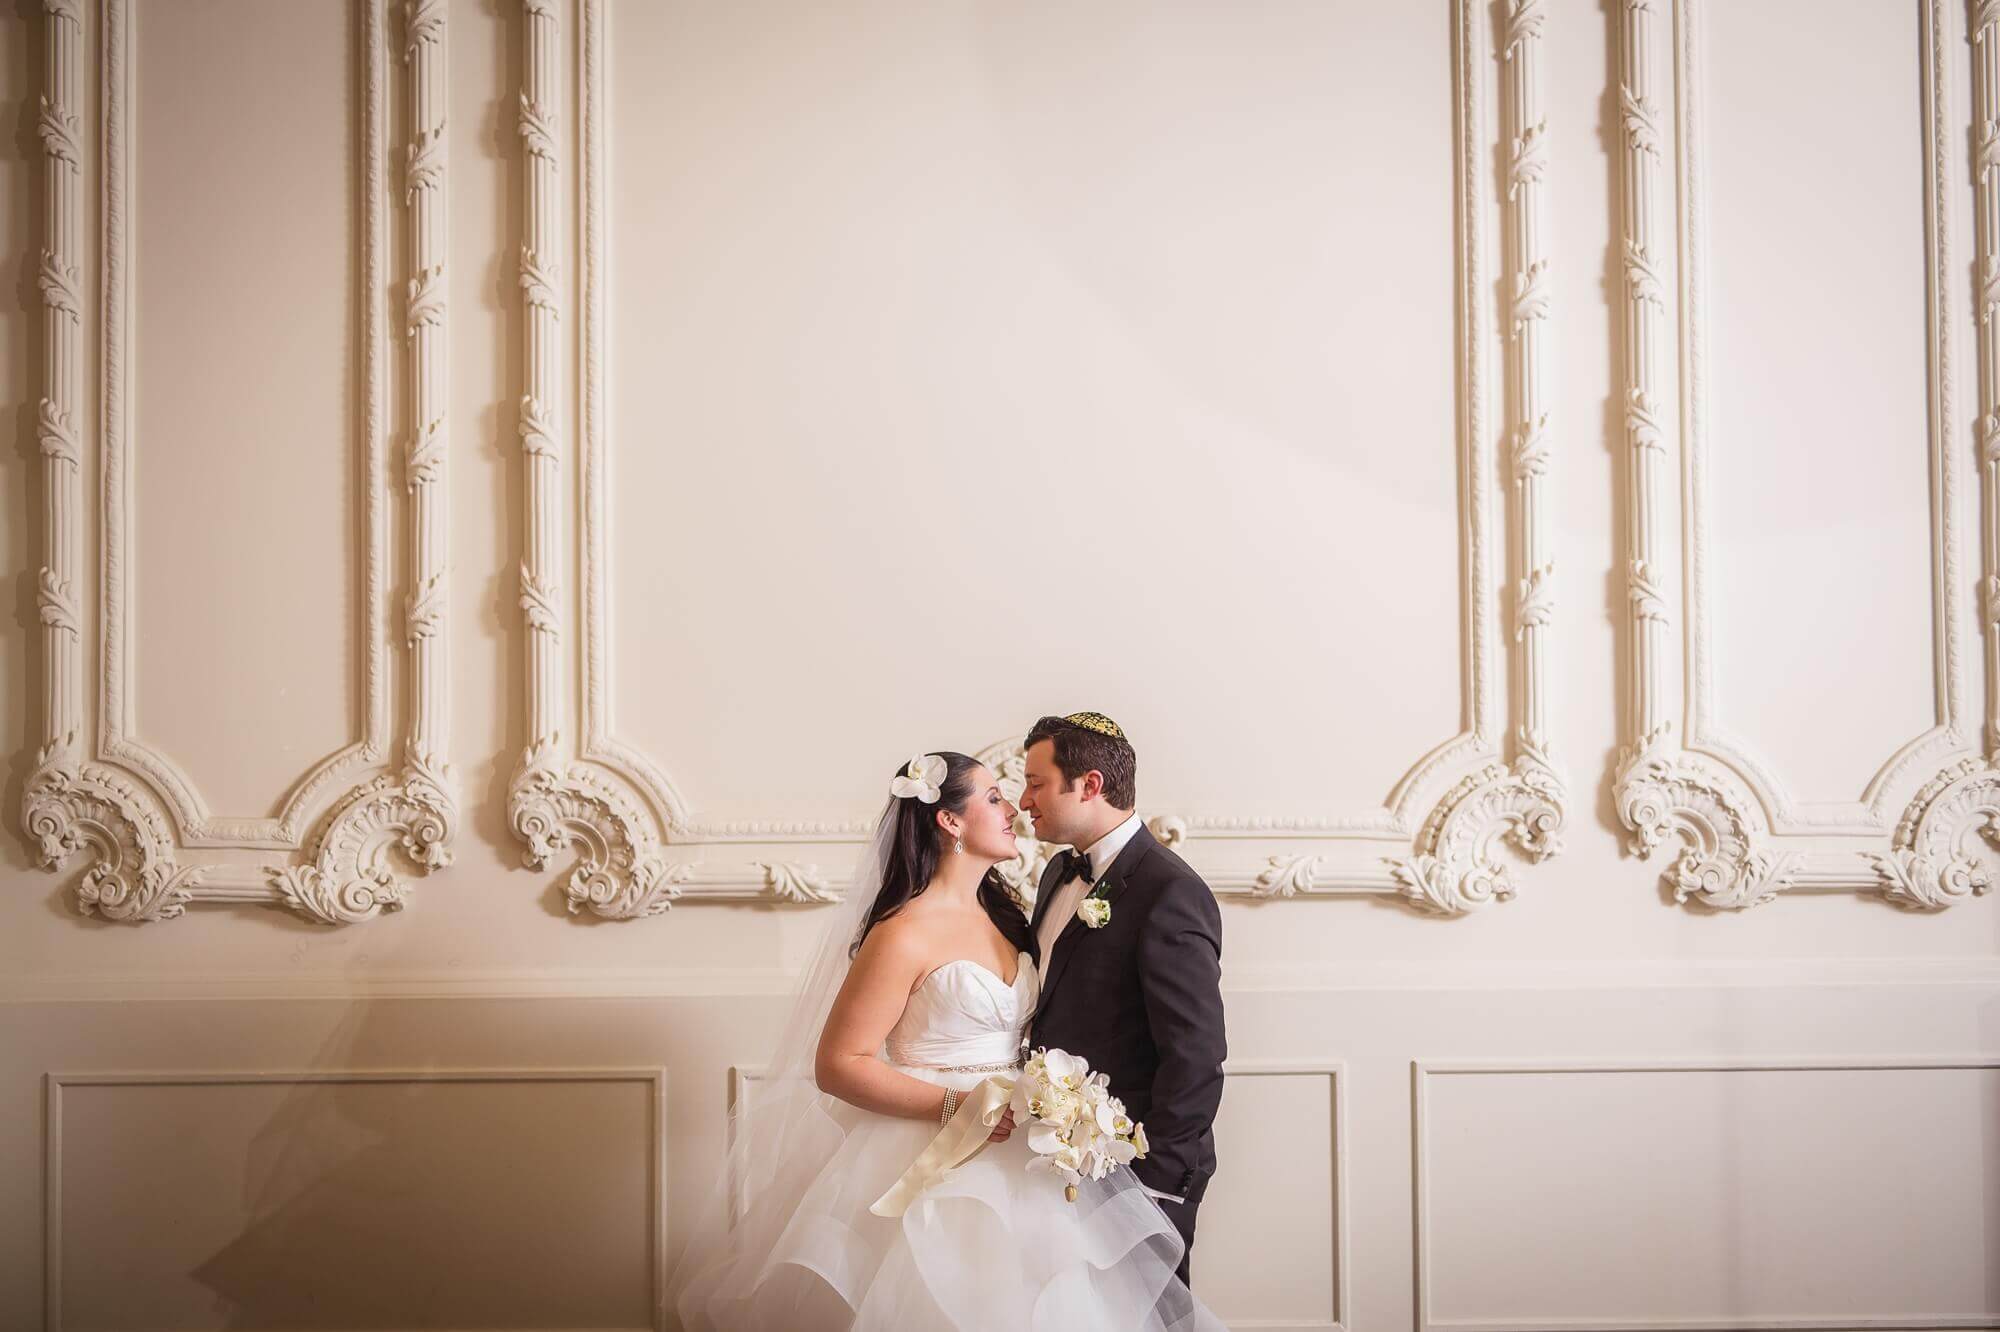 Simplistic, intimate portrait of the bride and groom at the Omni King Edward Hotel in Toronto